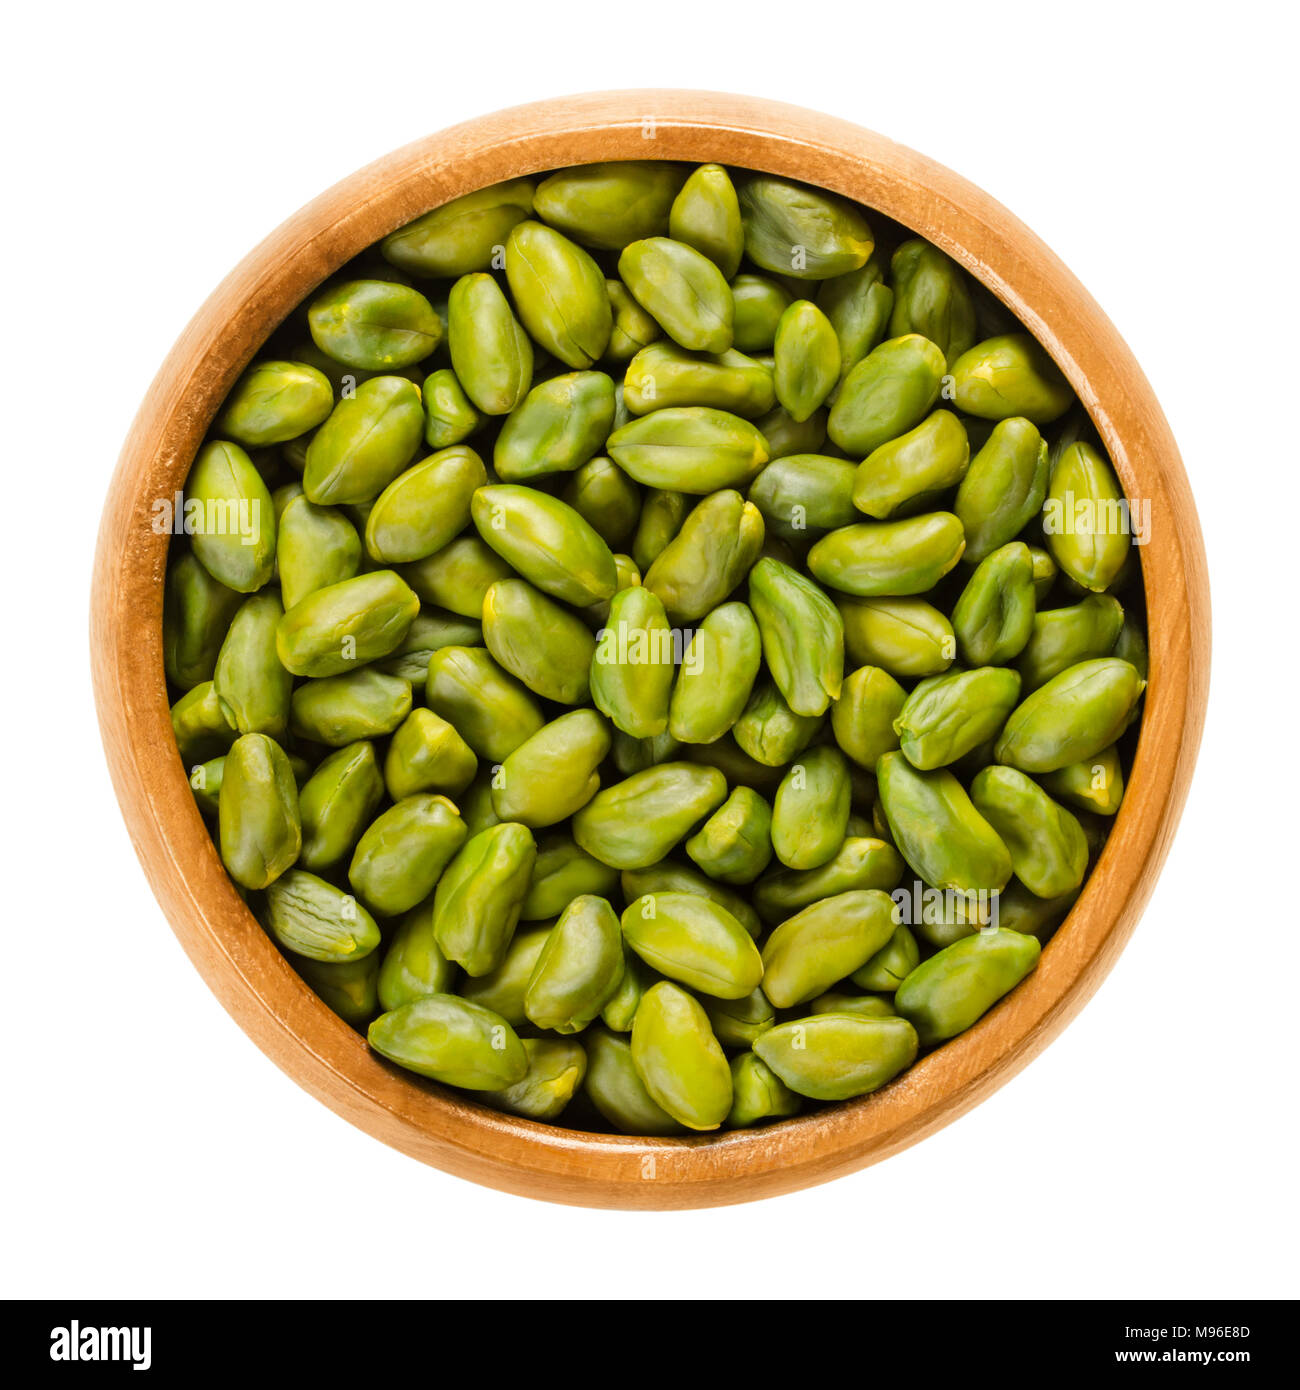 Green pistachios in wooden bowl. Dried and peeled kernels. Shelled fruits and seeds of Pistacia vera. Used as snack and for desserts. Stock Photo